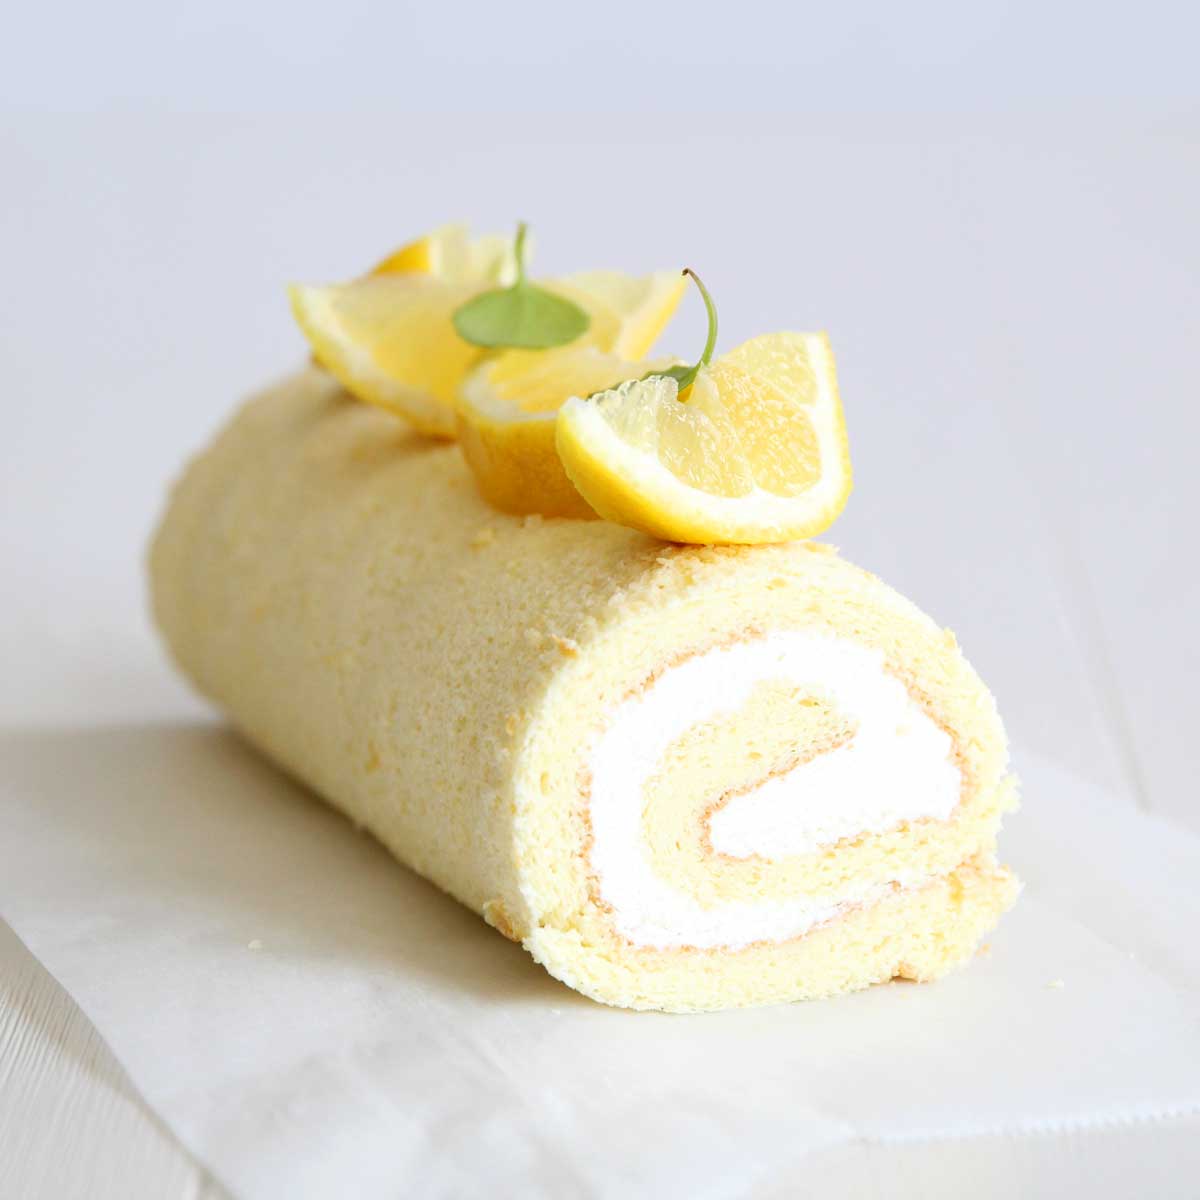 Gluten Free Lemon Roll Cake Recipe with Almond Flour - Peppermint Whipped Cream